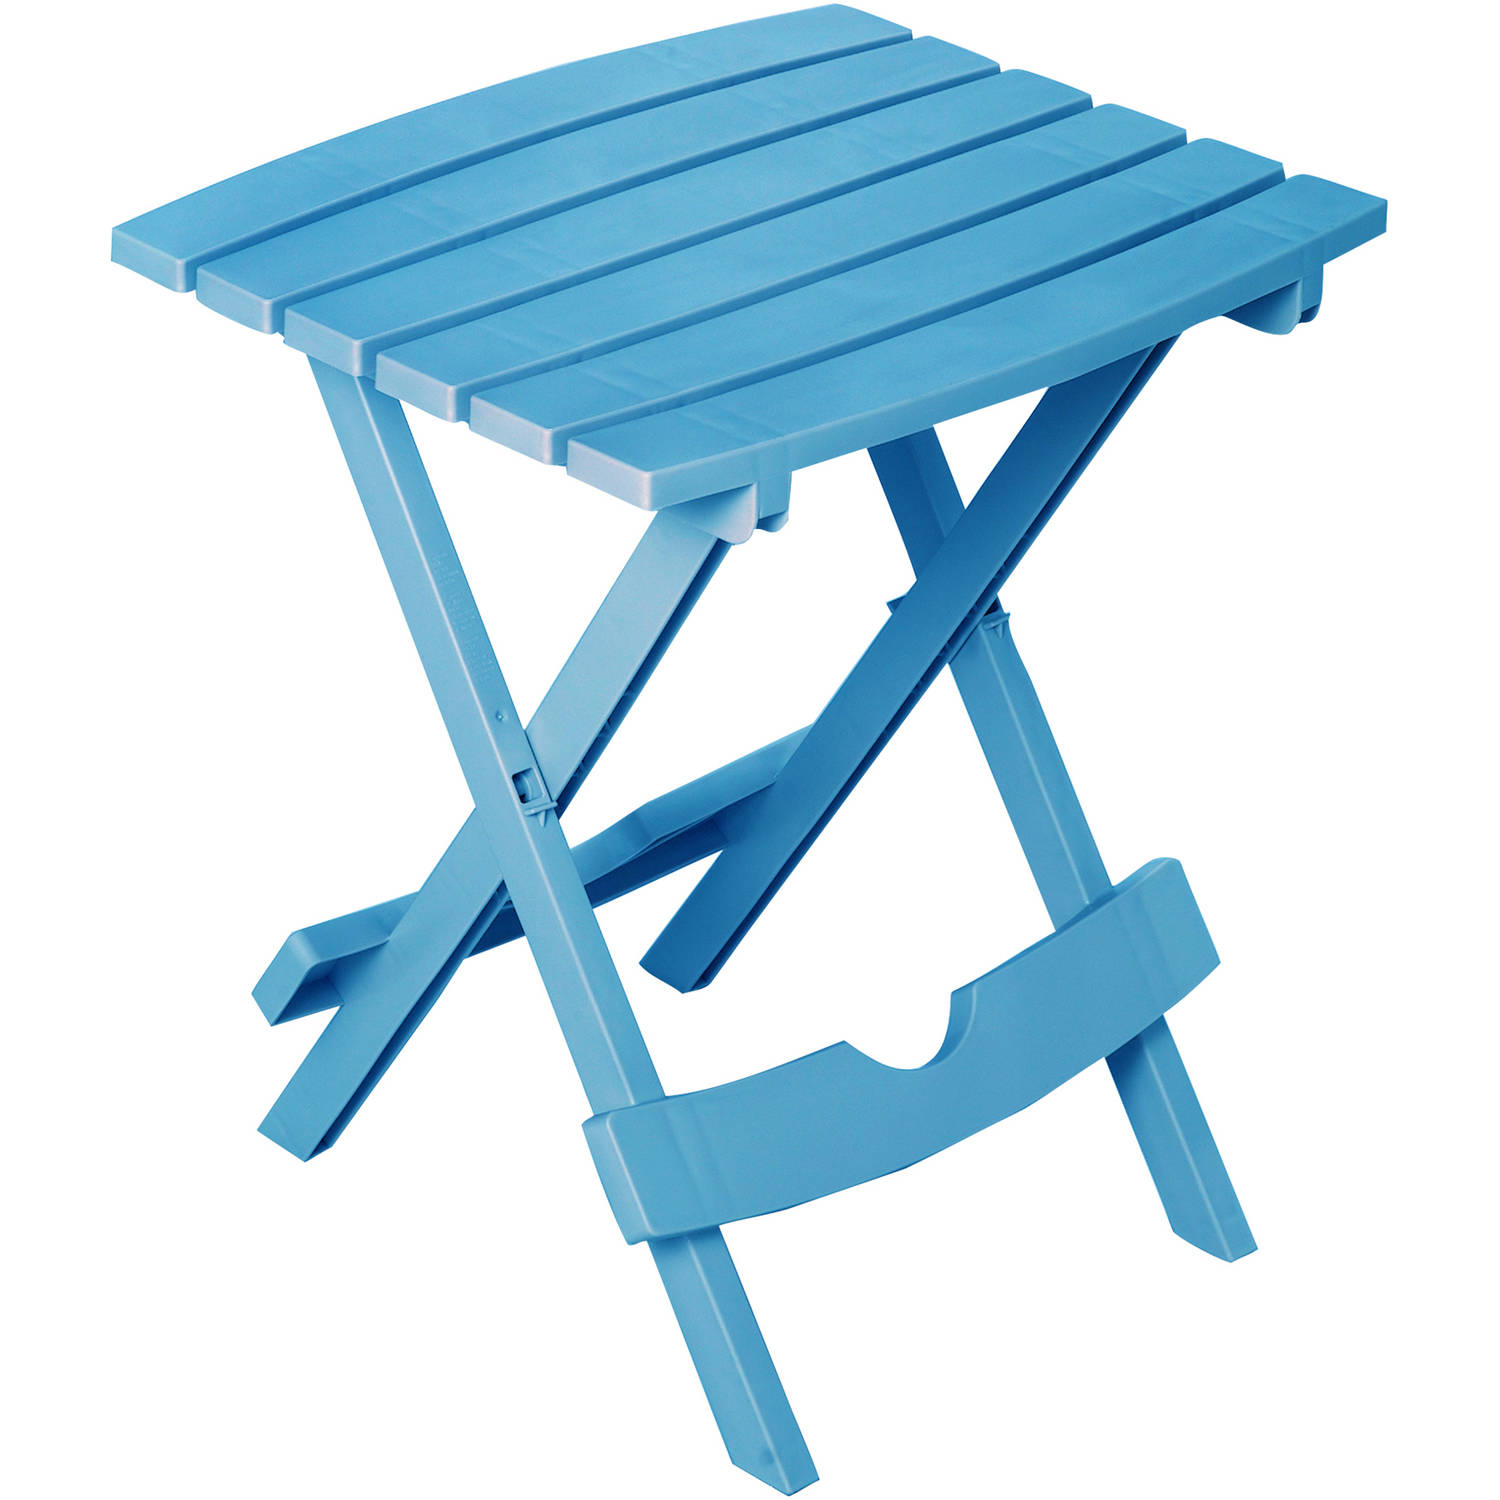 Adams Manufacturing Quik-Fold Side Table, Blue - image 1 of 5